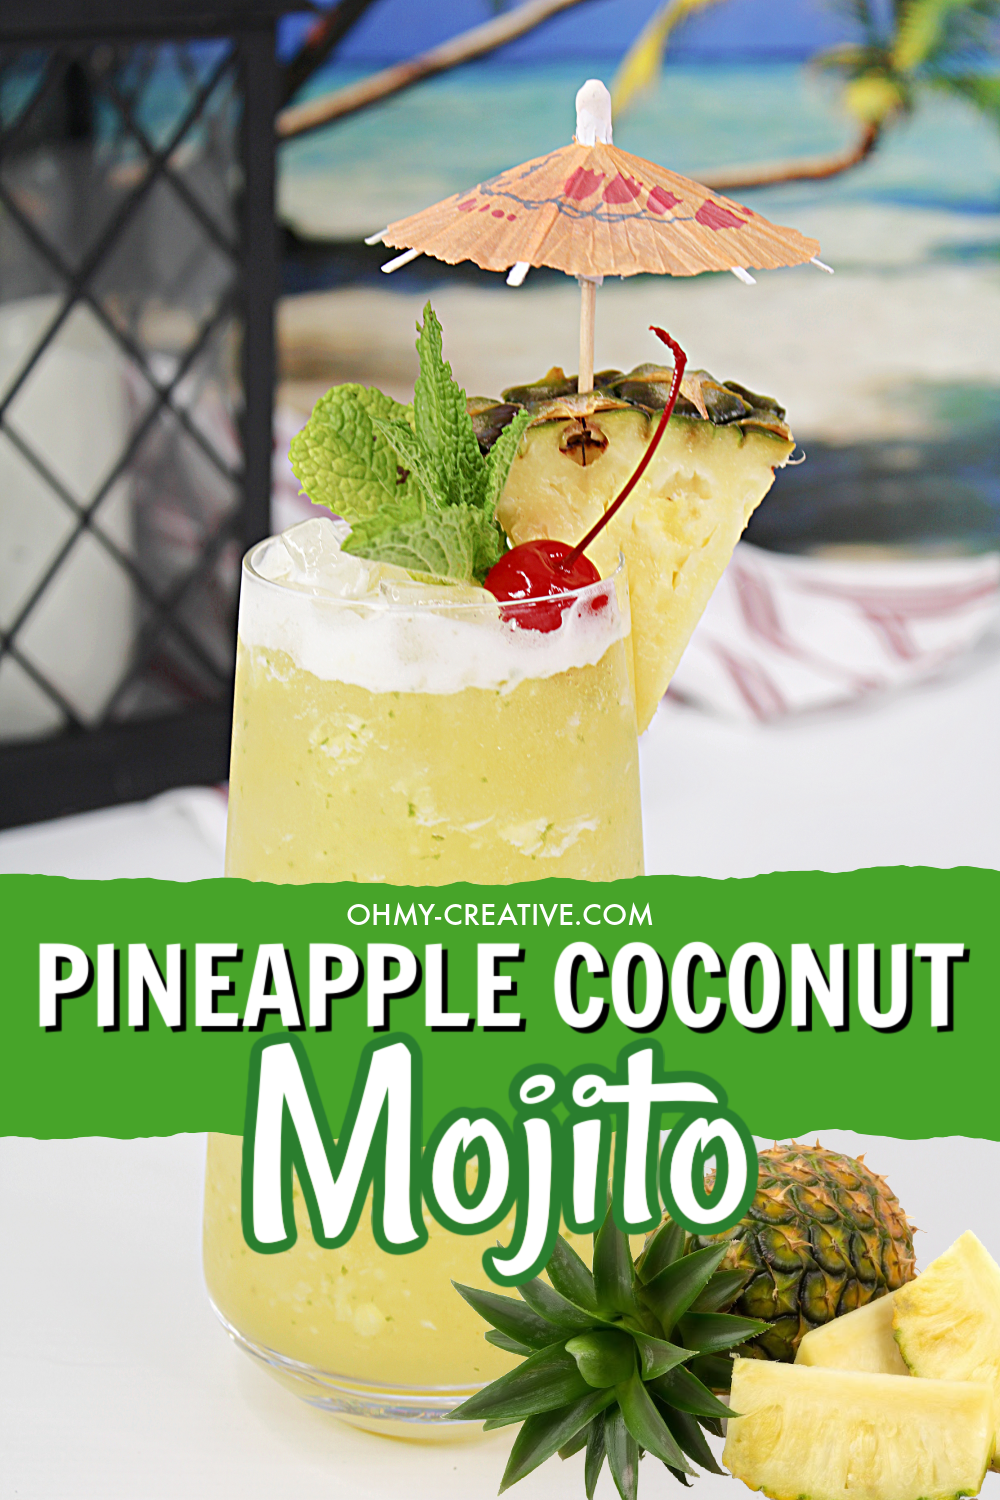 A tall glass of pineapple coconut mojito with all the flavors of the tropics! Garnished with a wedge of pineapple, maraschino cherry and an umbrella. A tropical beach scene is in the background.
